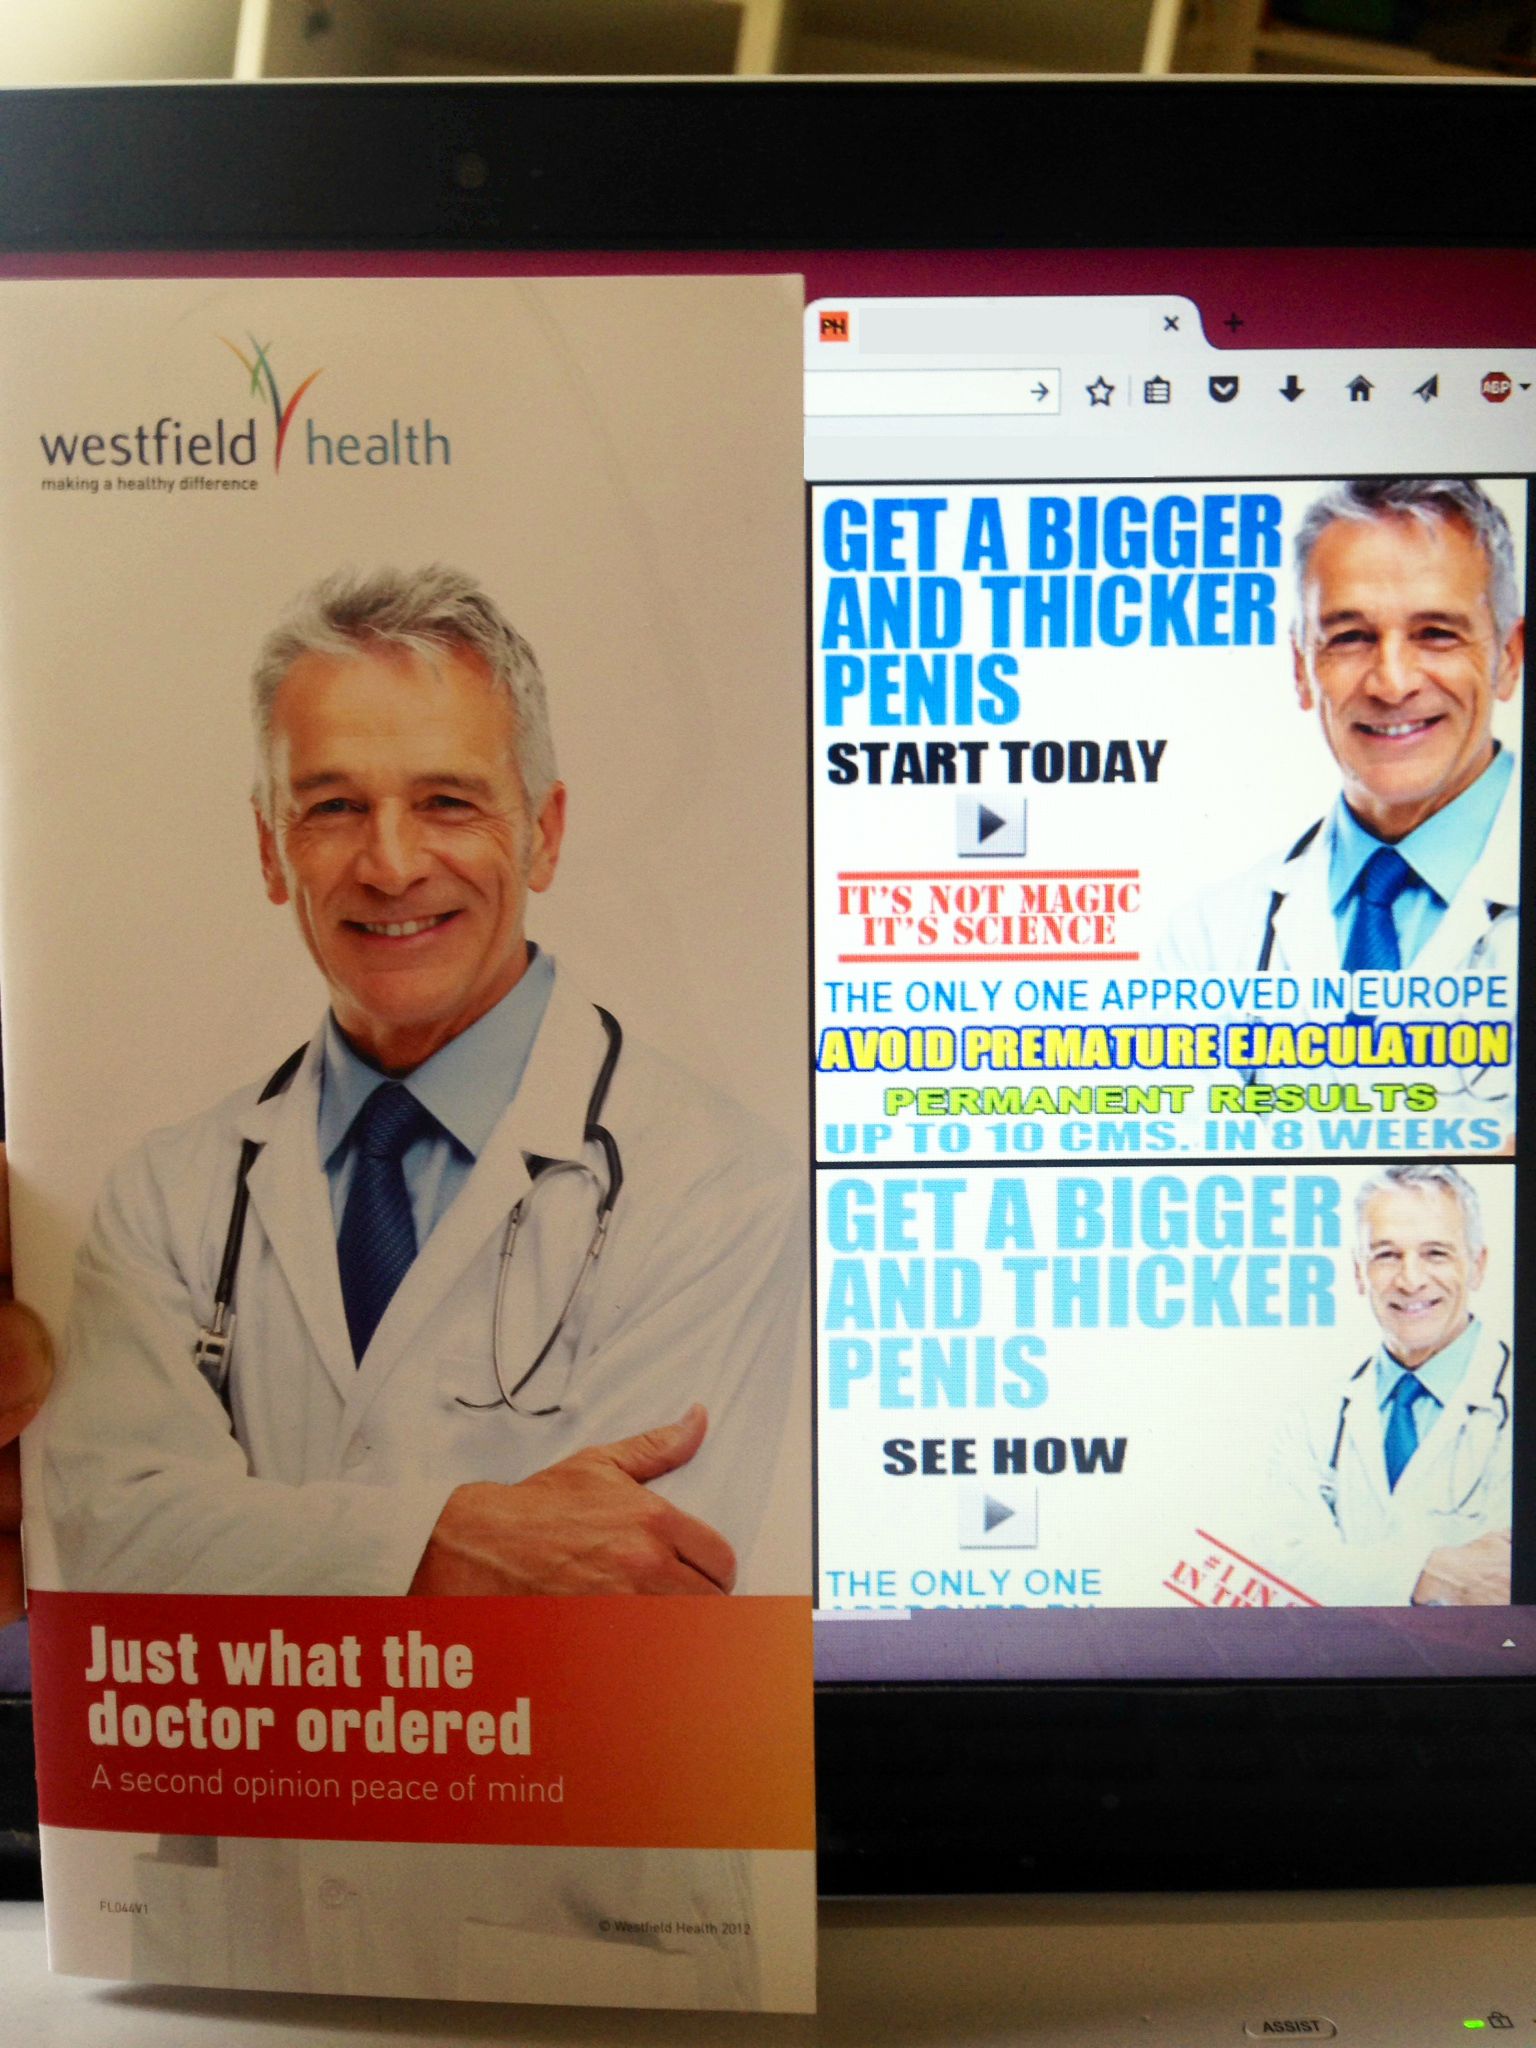 get bigger and thicker penis - westfield health making a healthy difference Get A Bigger And Thicker Penis Start Today It'S Not Magic It'S Science The Only One Approved In Europe Avoid Premature Ejaculation Permanent Results Up To 10 Cms. In 8 Weeks Get A